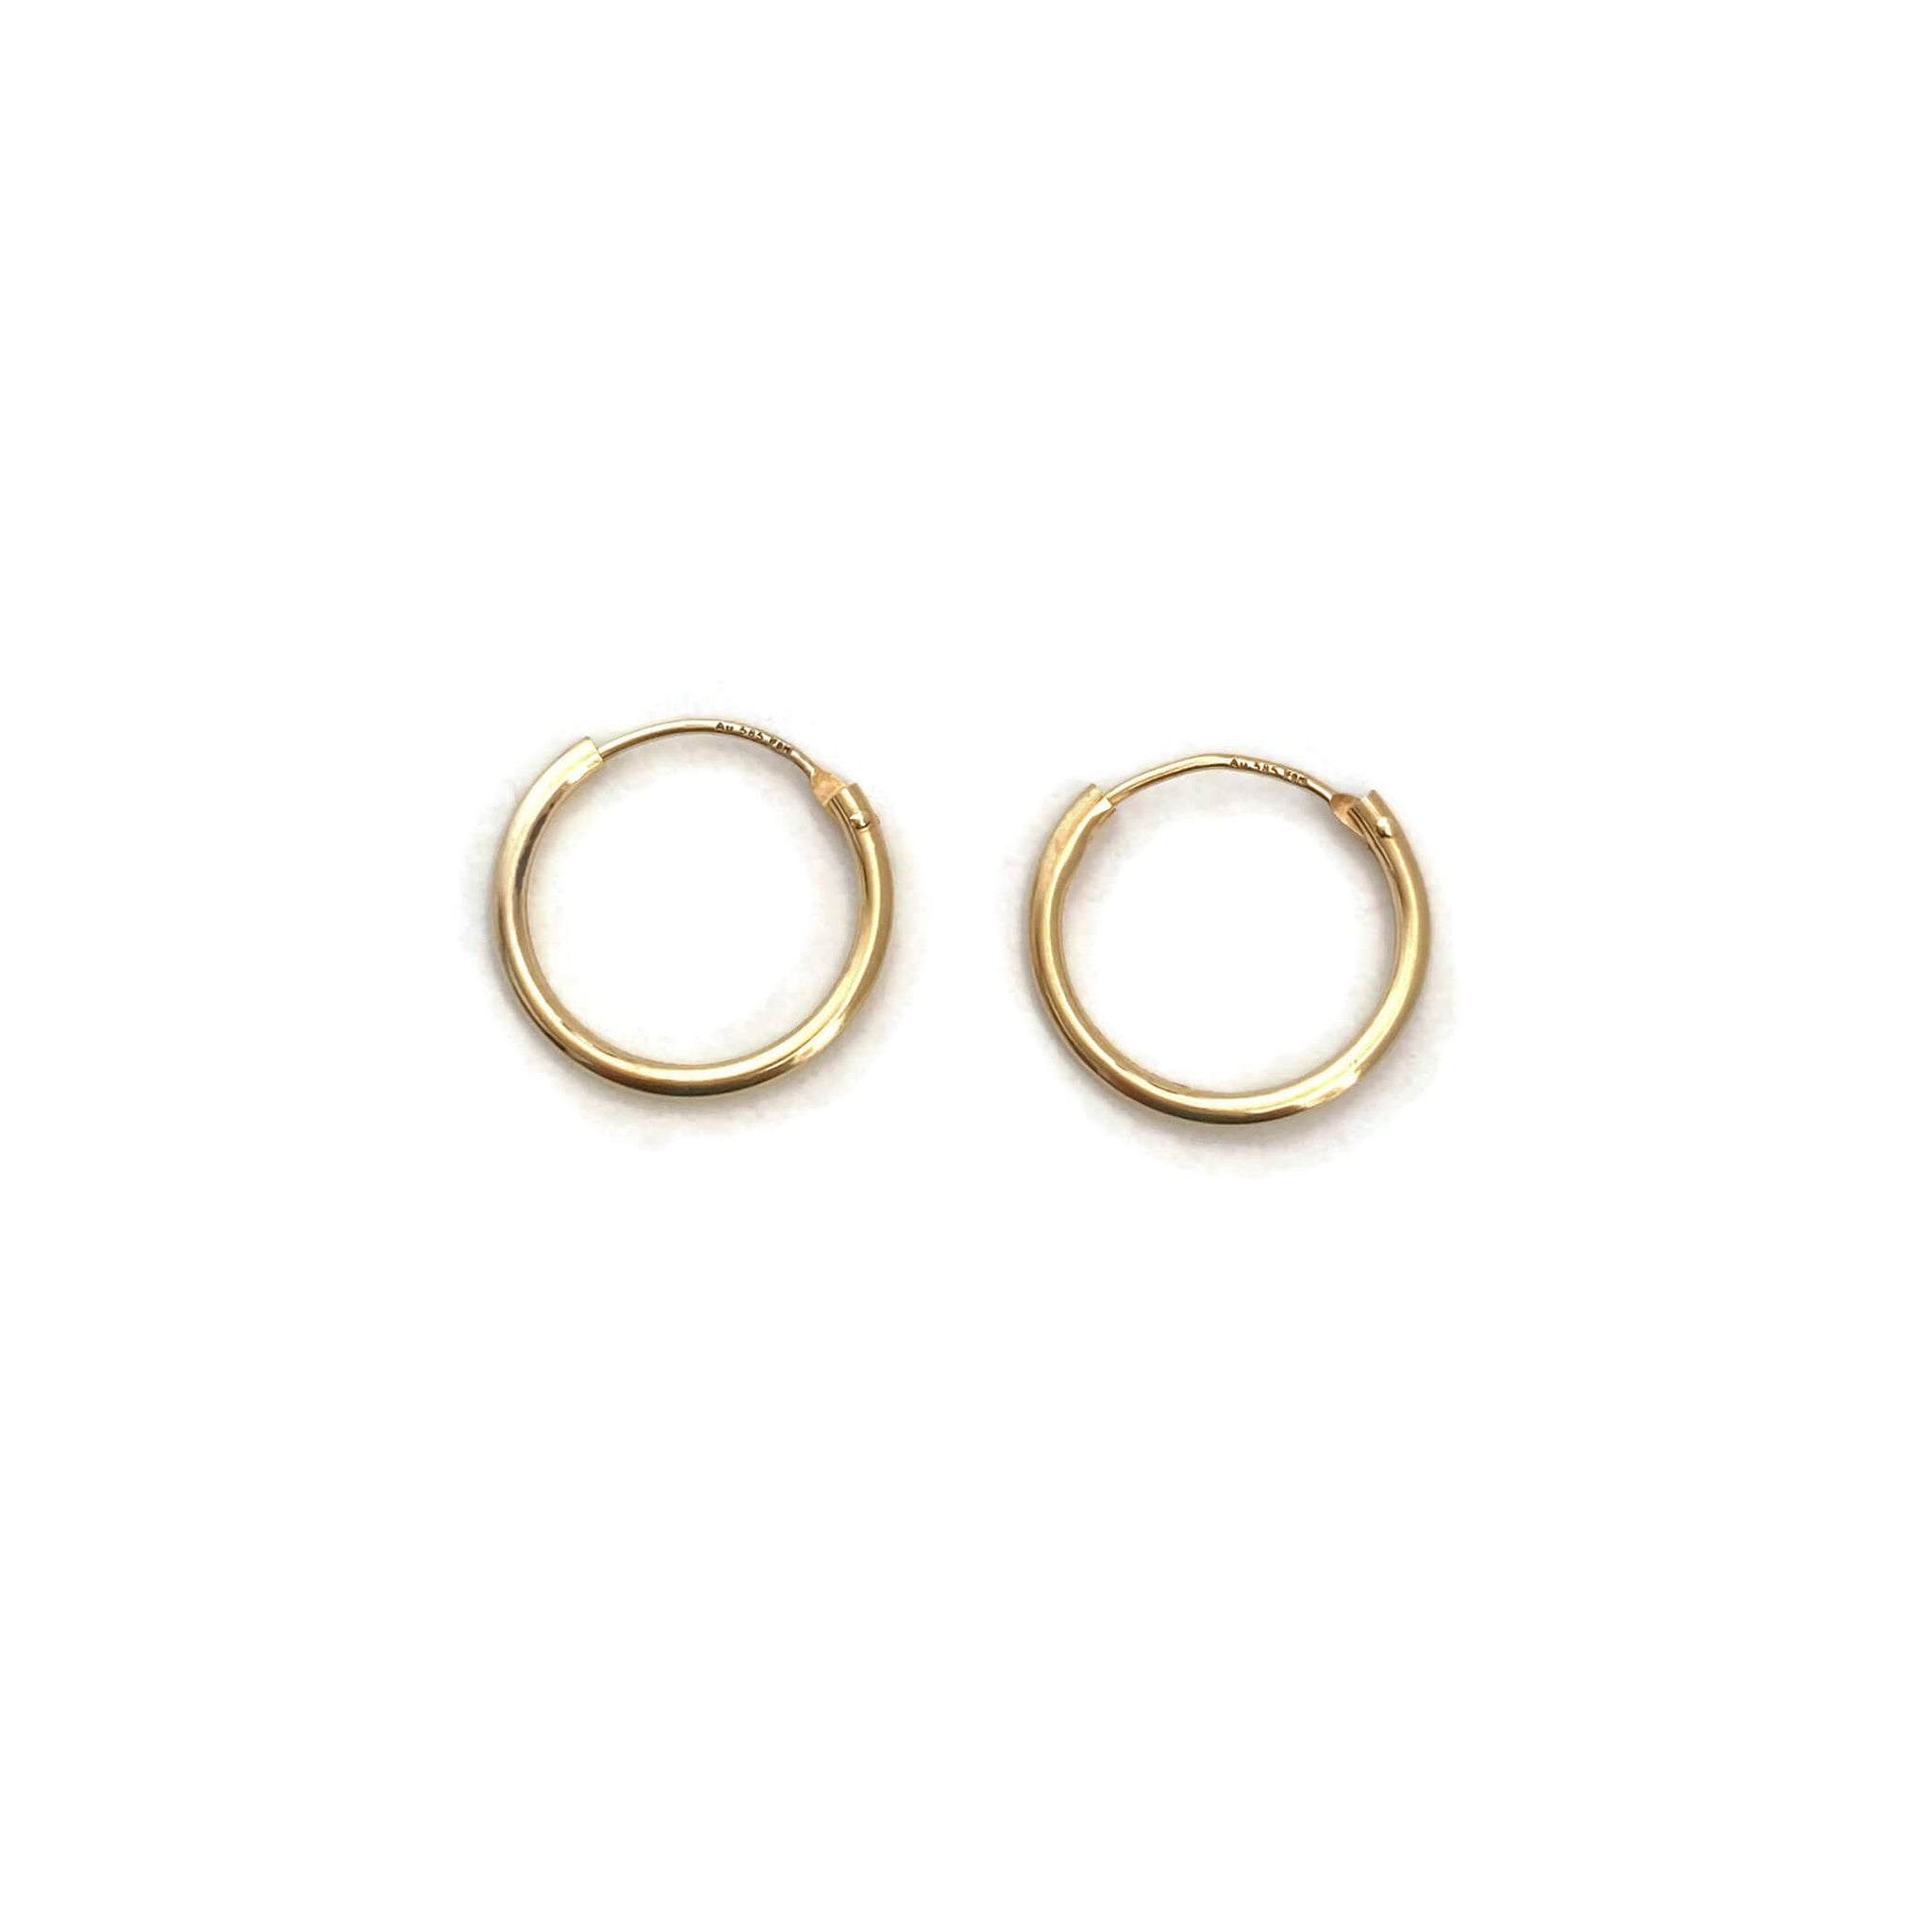 These are 14k solid gold hoop earrings. They are as light as feather and great to wear them 24/7